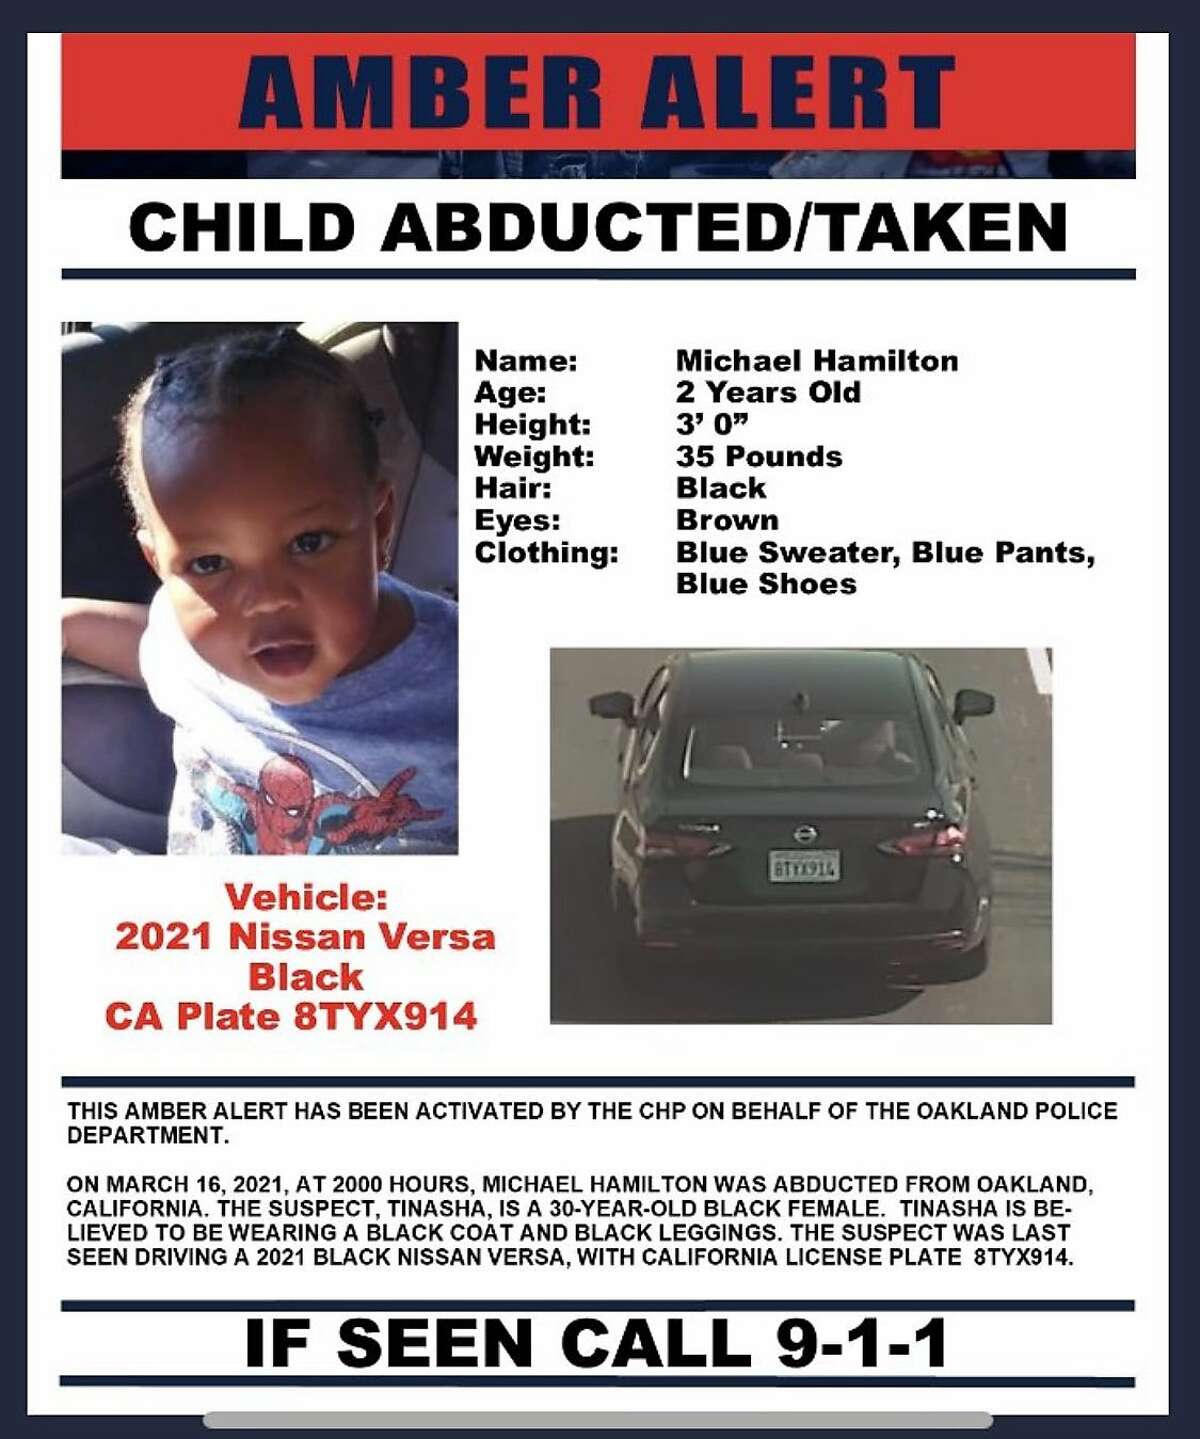 Police are searching for a 2-year-old child, Michael Hamilton, whom they say was kidnapped in Oakland Tuesday.